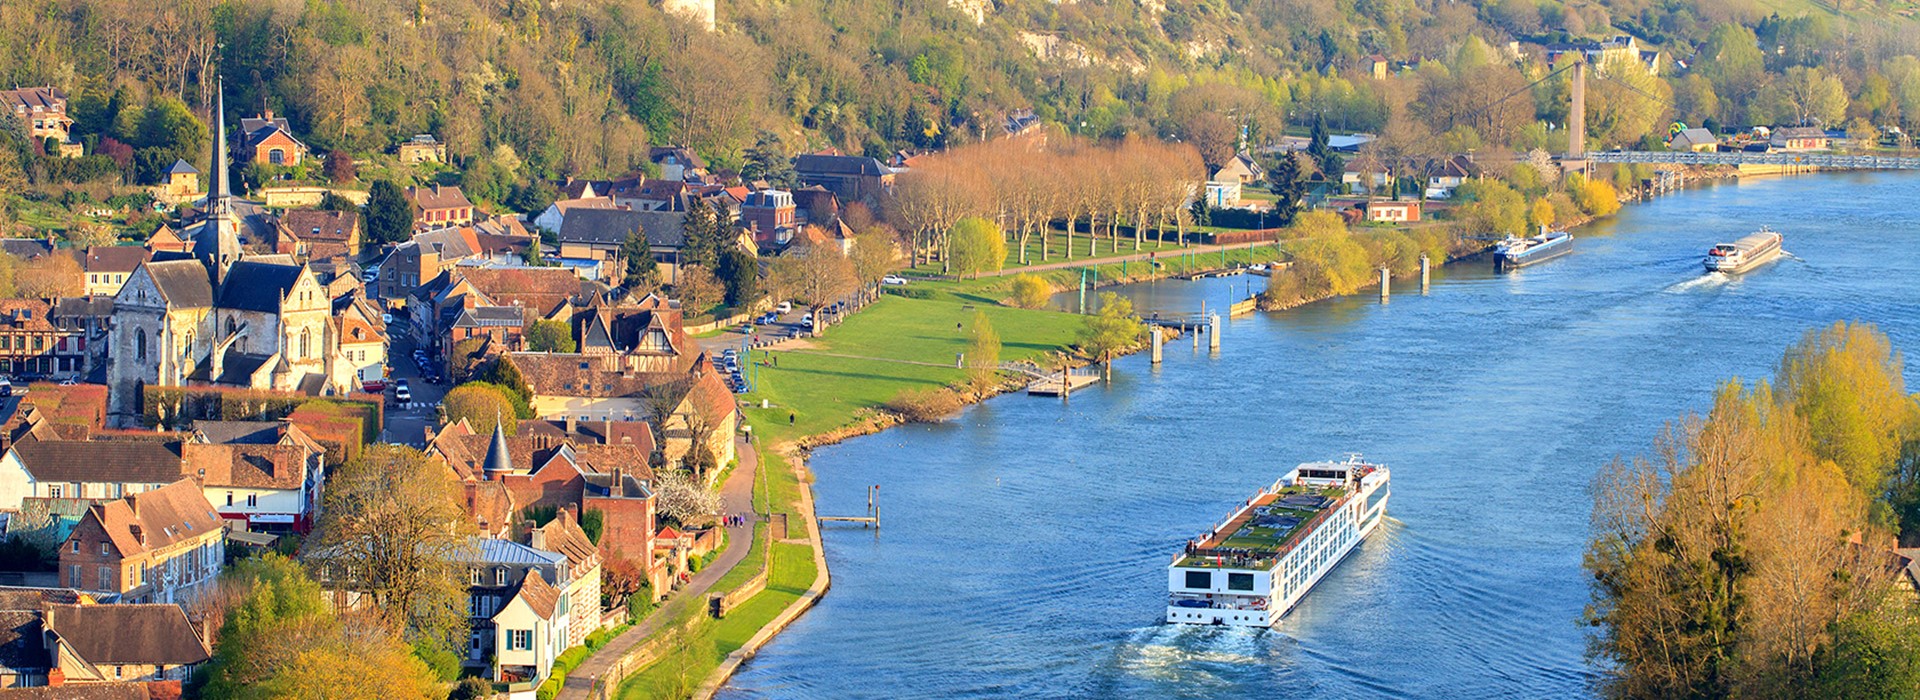 luxury river cruise normandy